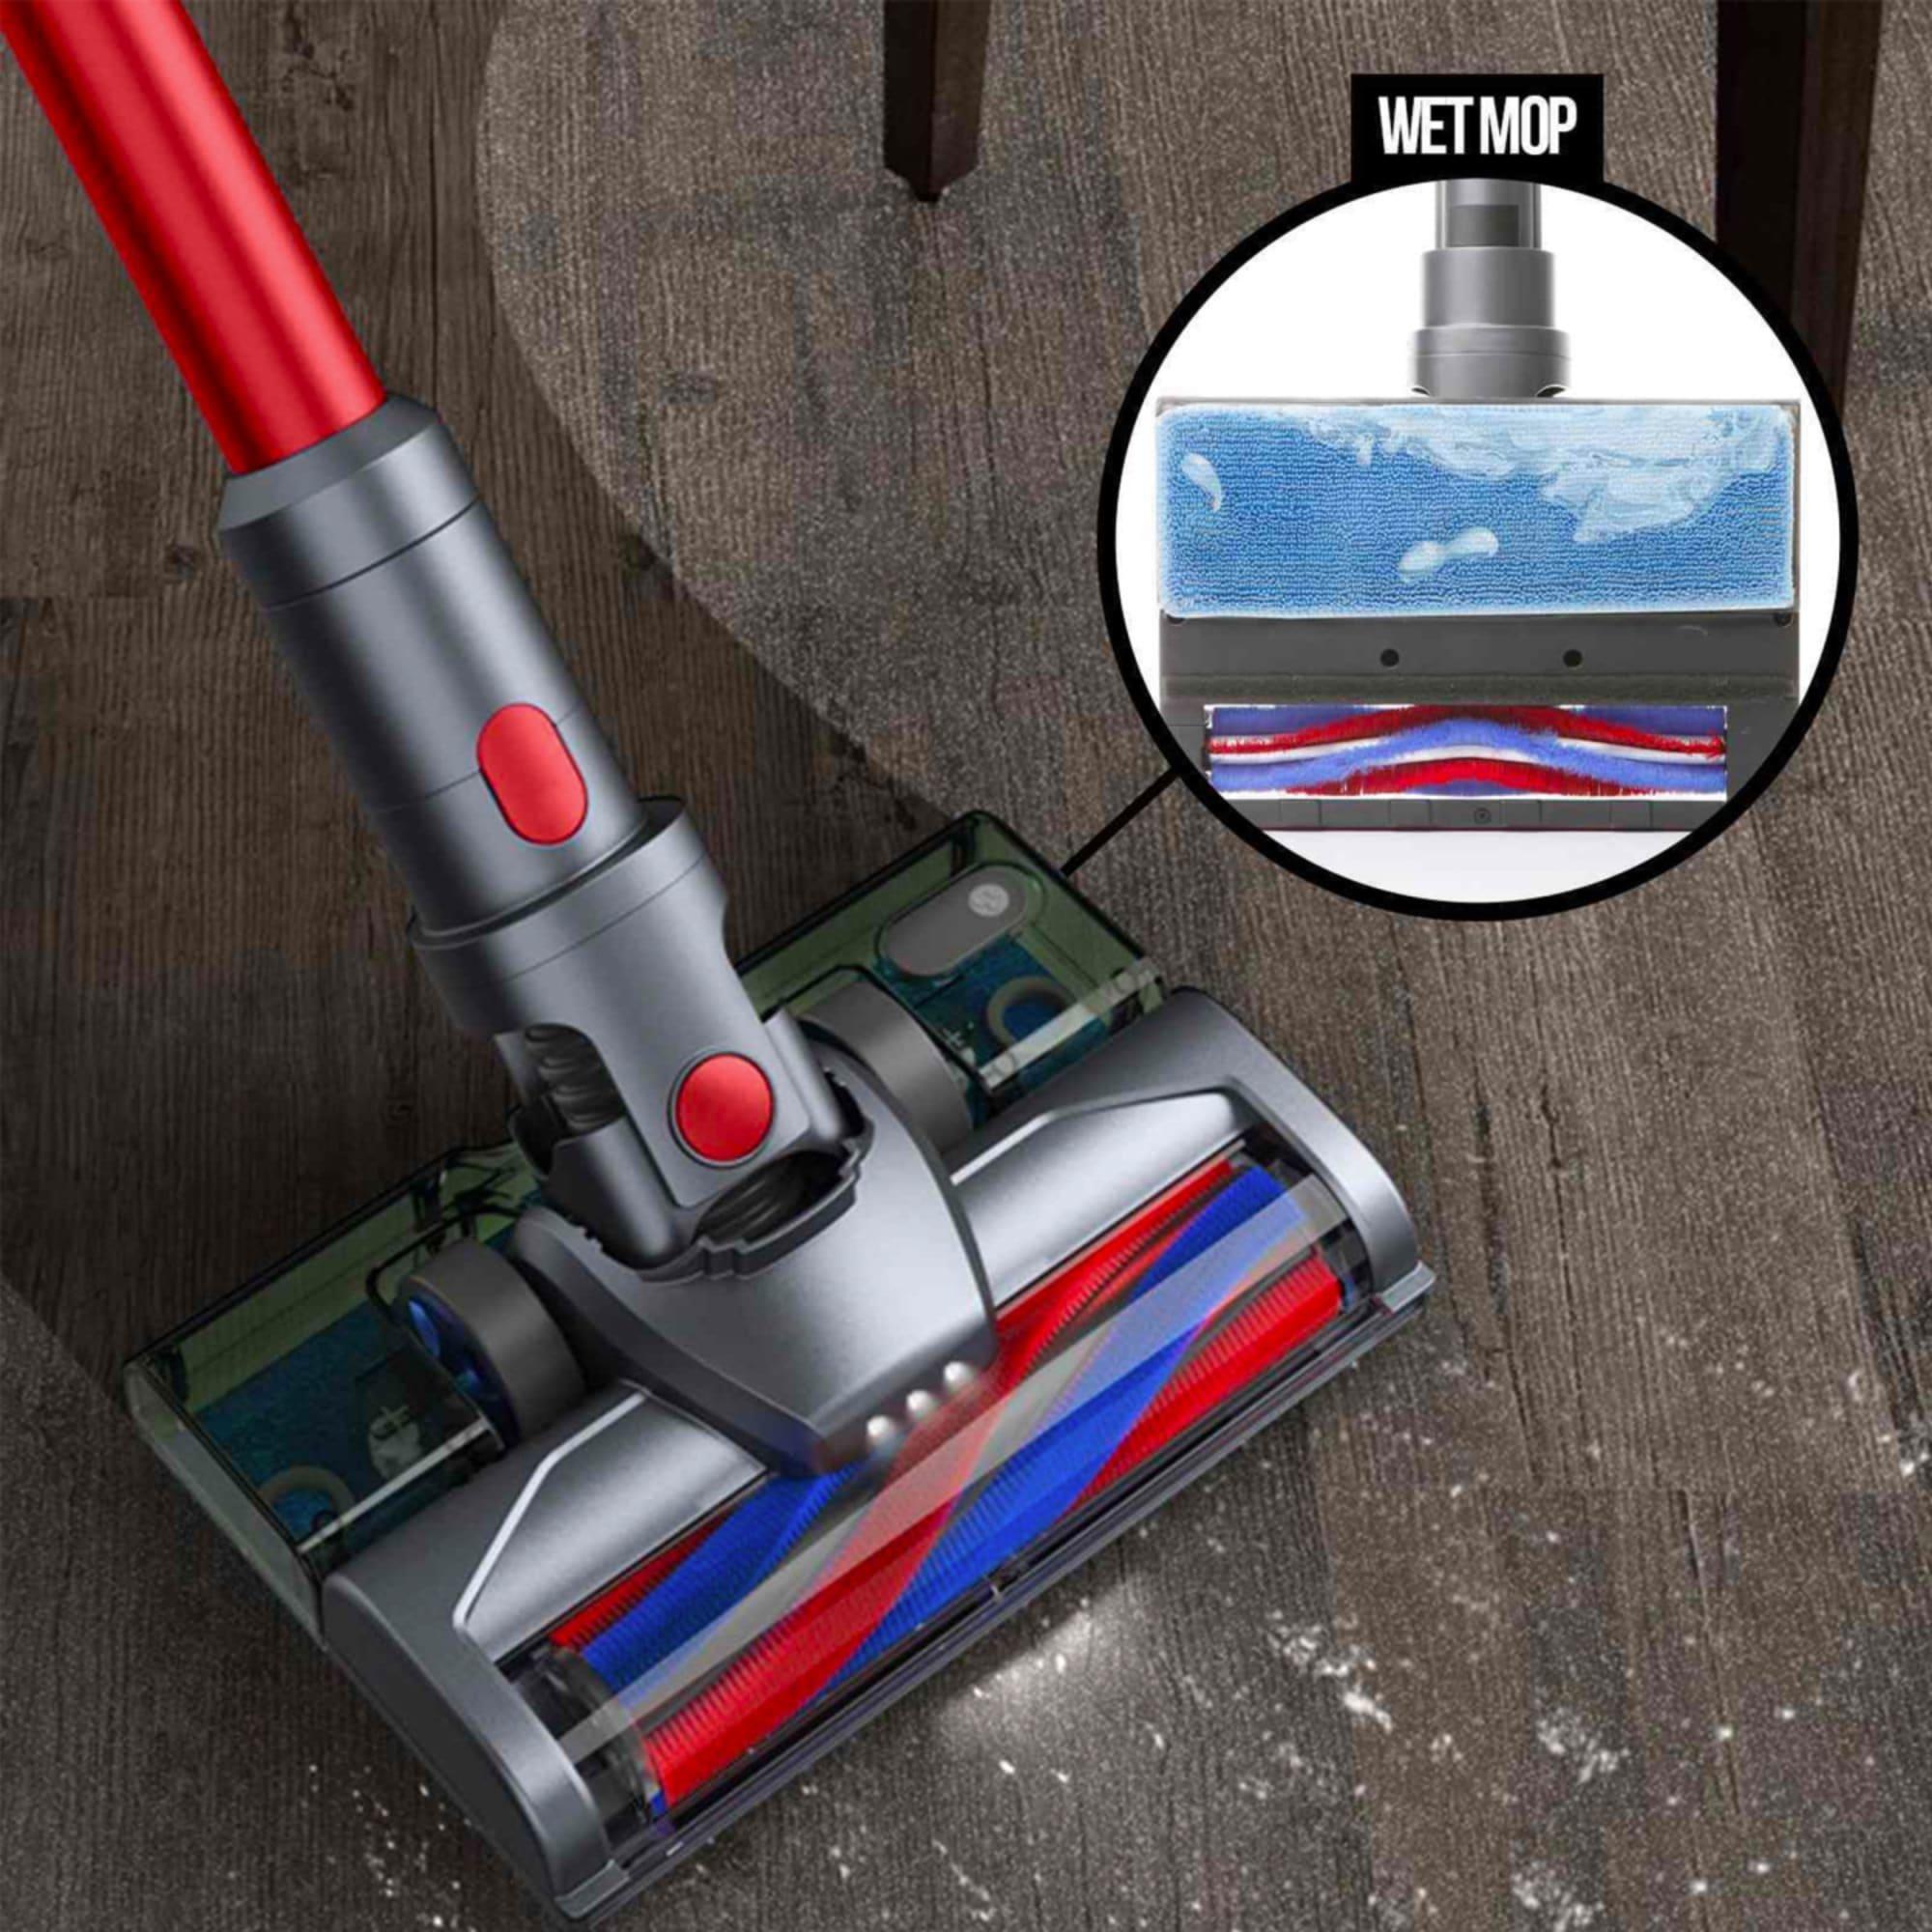 MyGenie H20 Pro Wet Mop 2 in 1 Cordless Stick Vacuum Cleaner Red Image 4